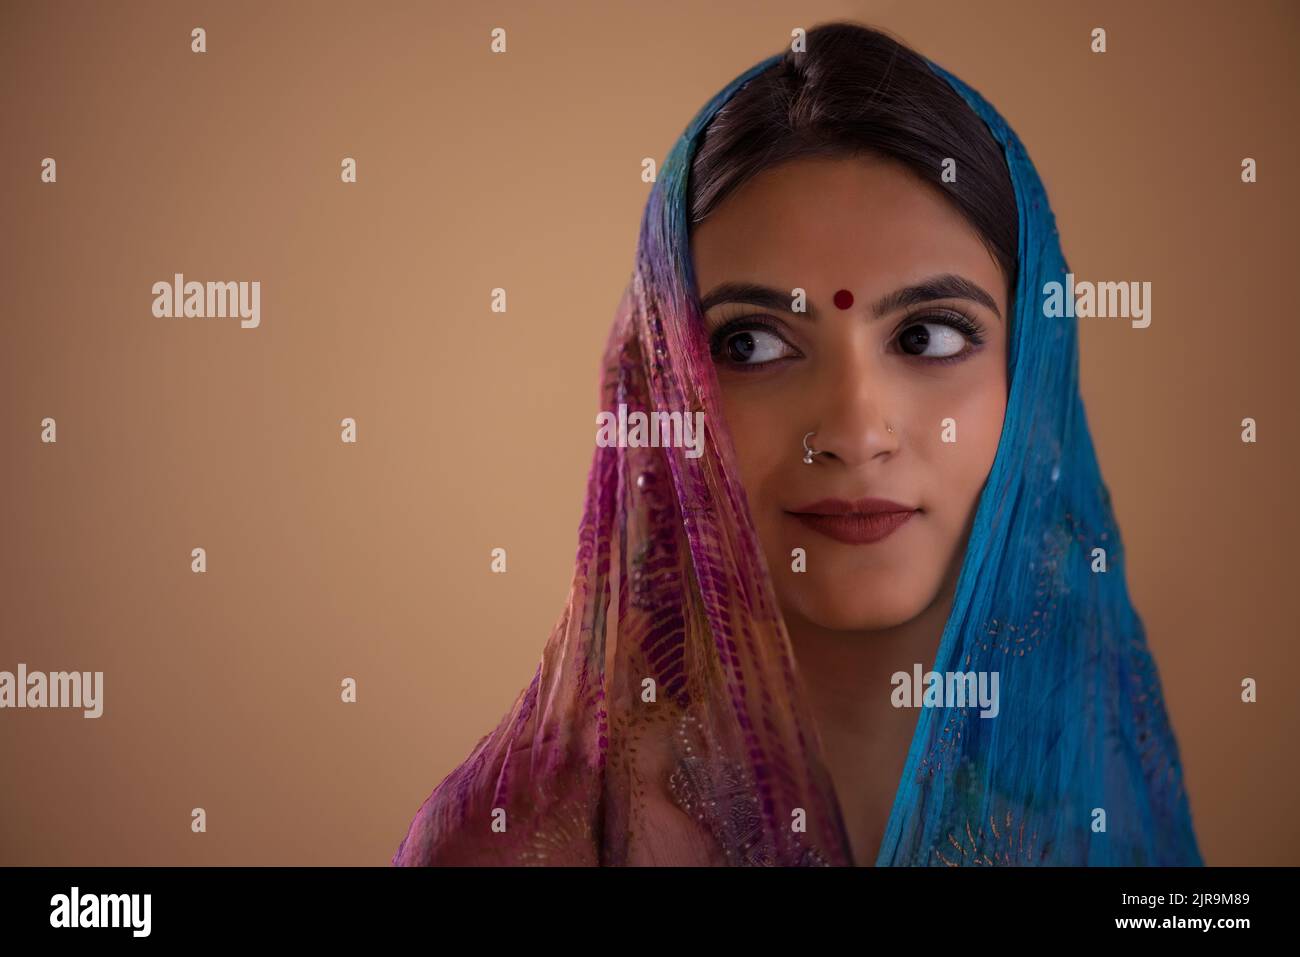 Portrait of an Indian woman in colourful veil Stock Photo